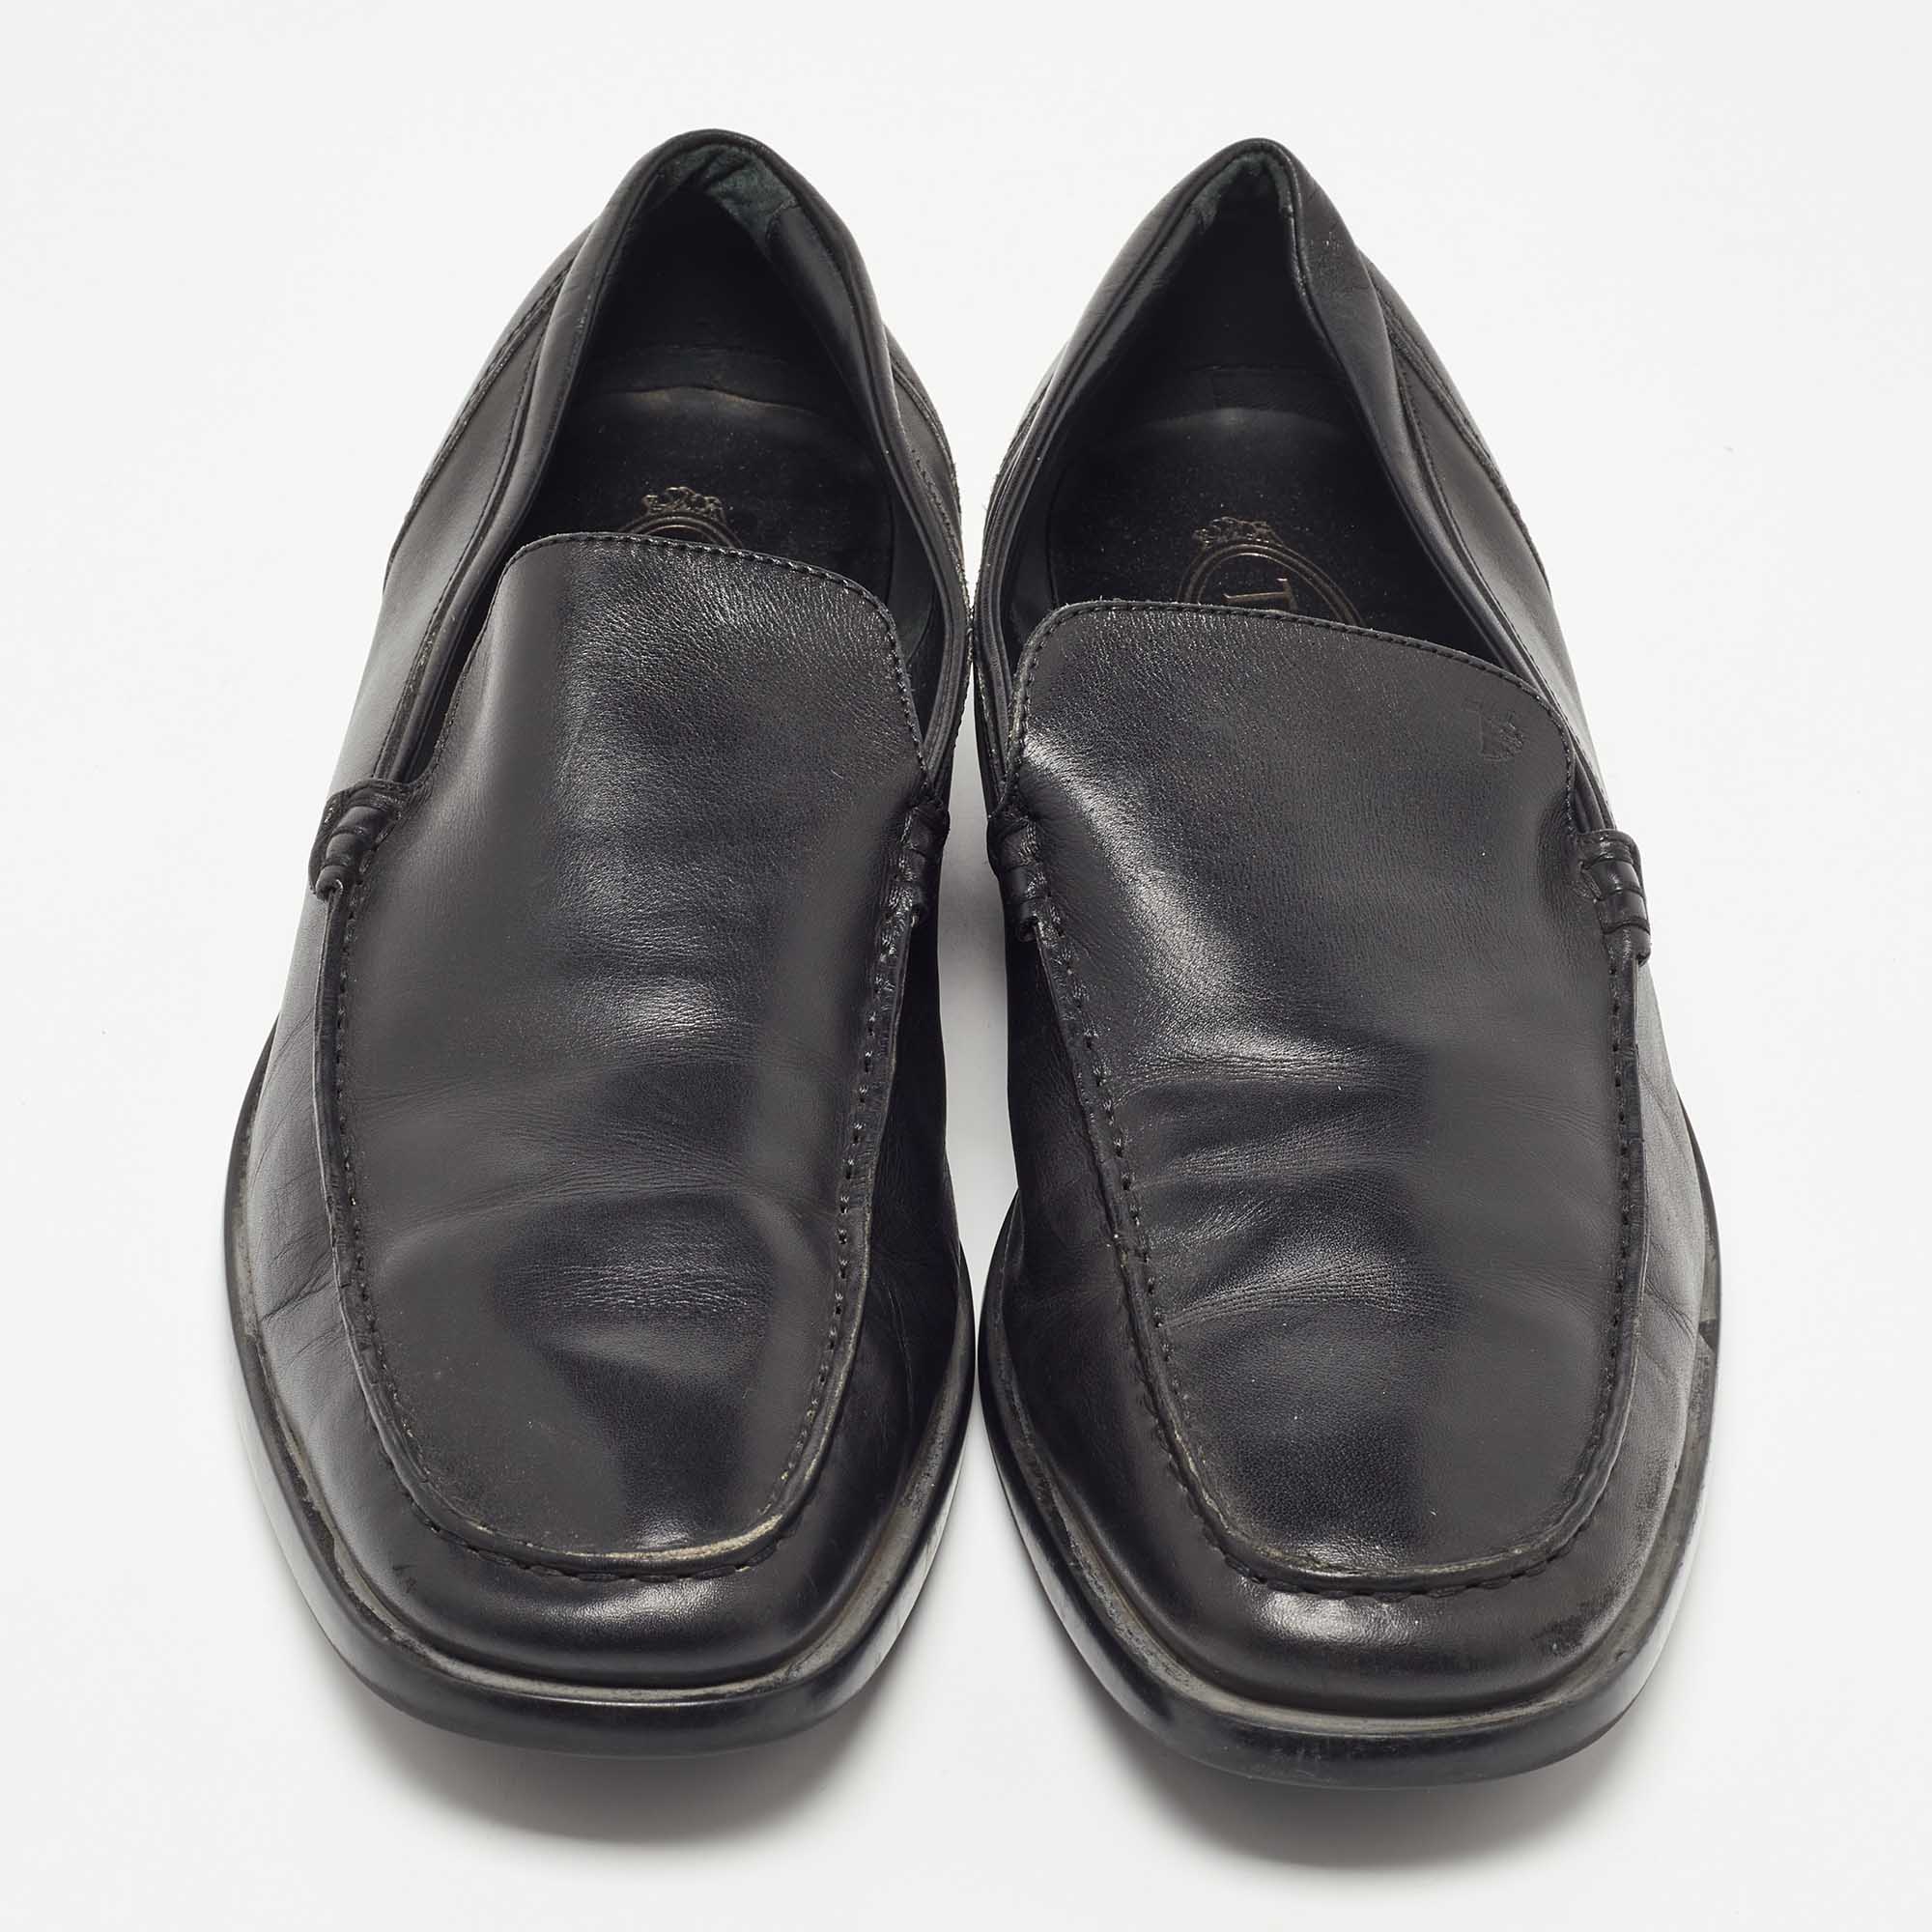 Tod's Black Leather Slip On Loafers Size 44